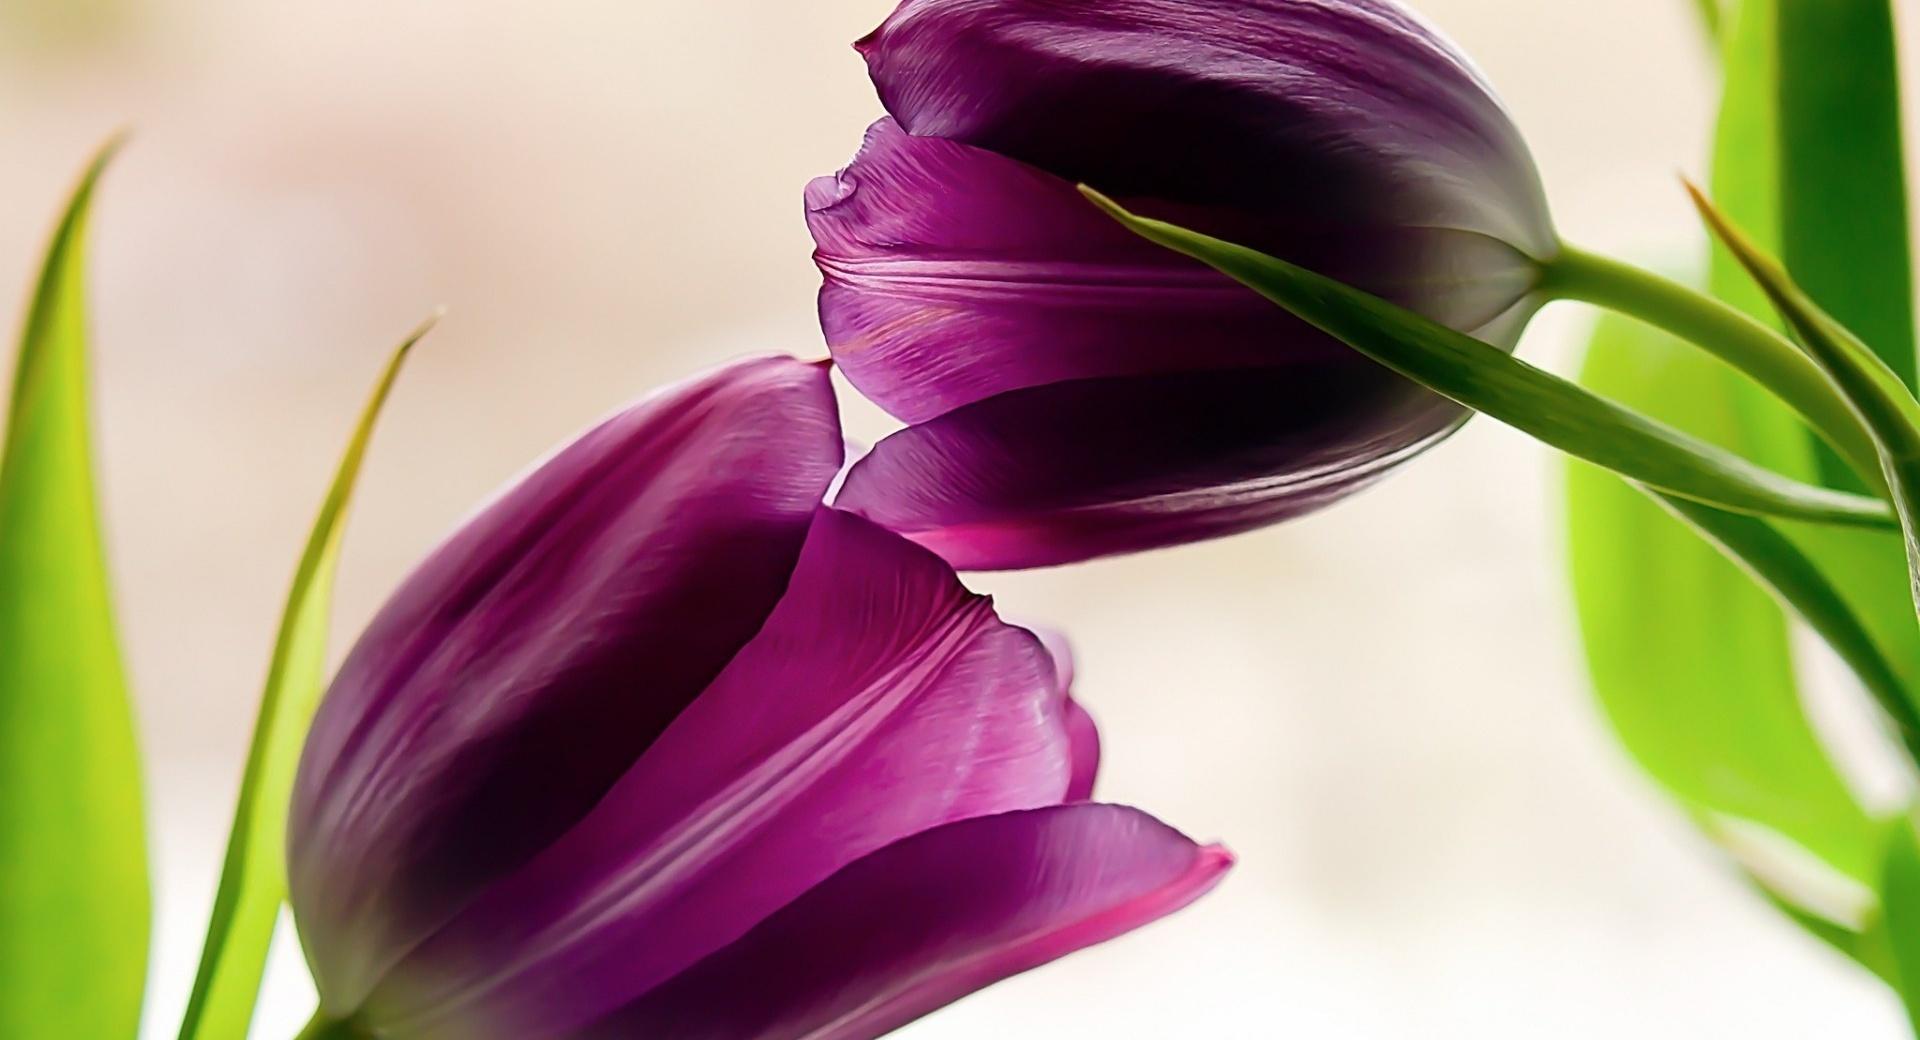 Tulips Violet Petals wallpapers HD quality